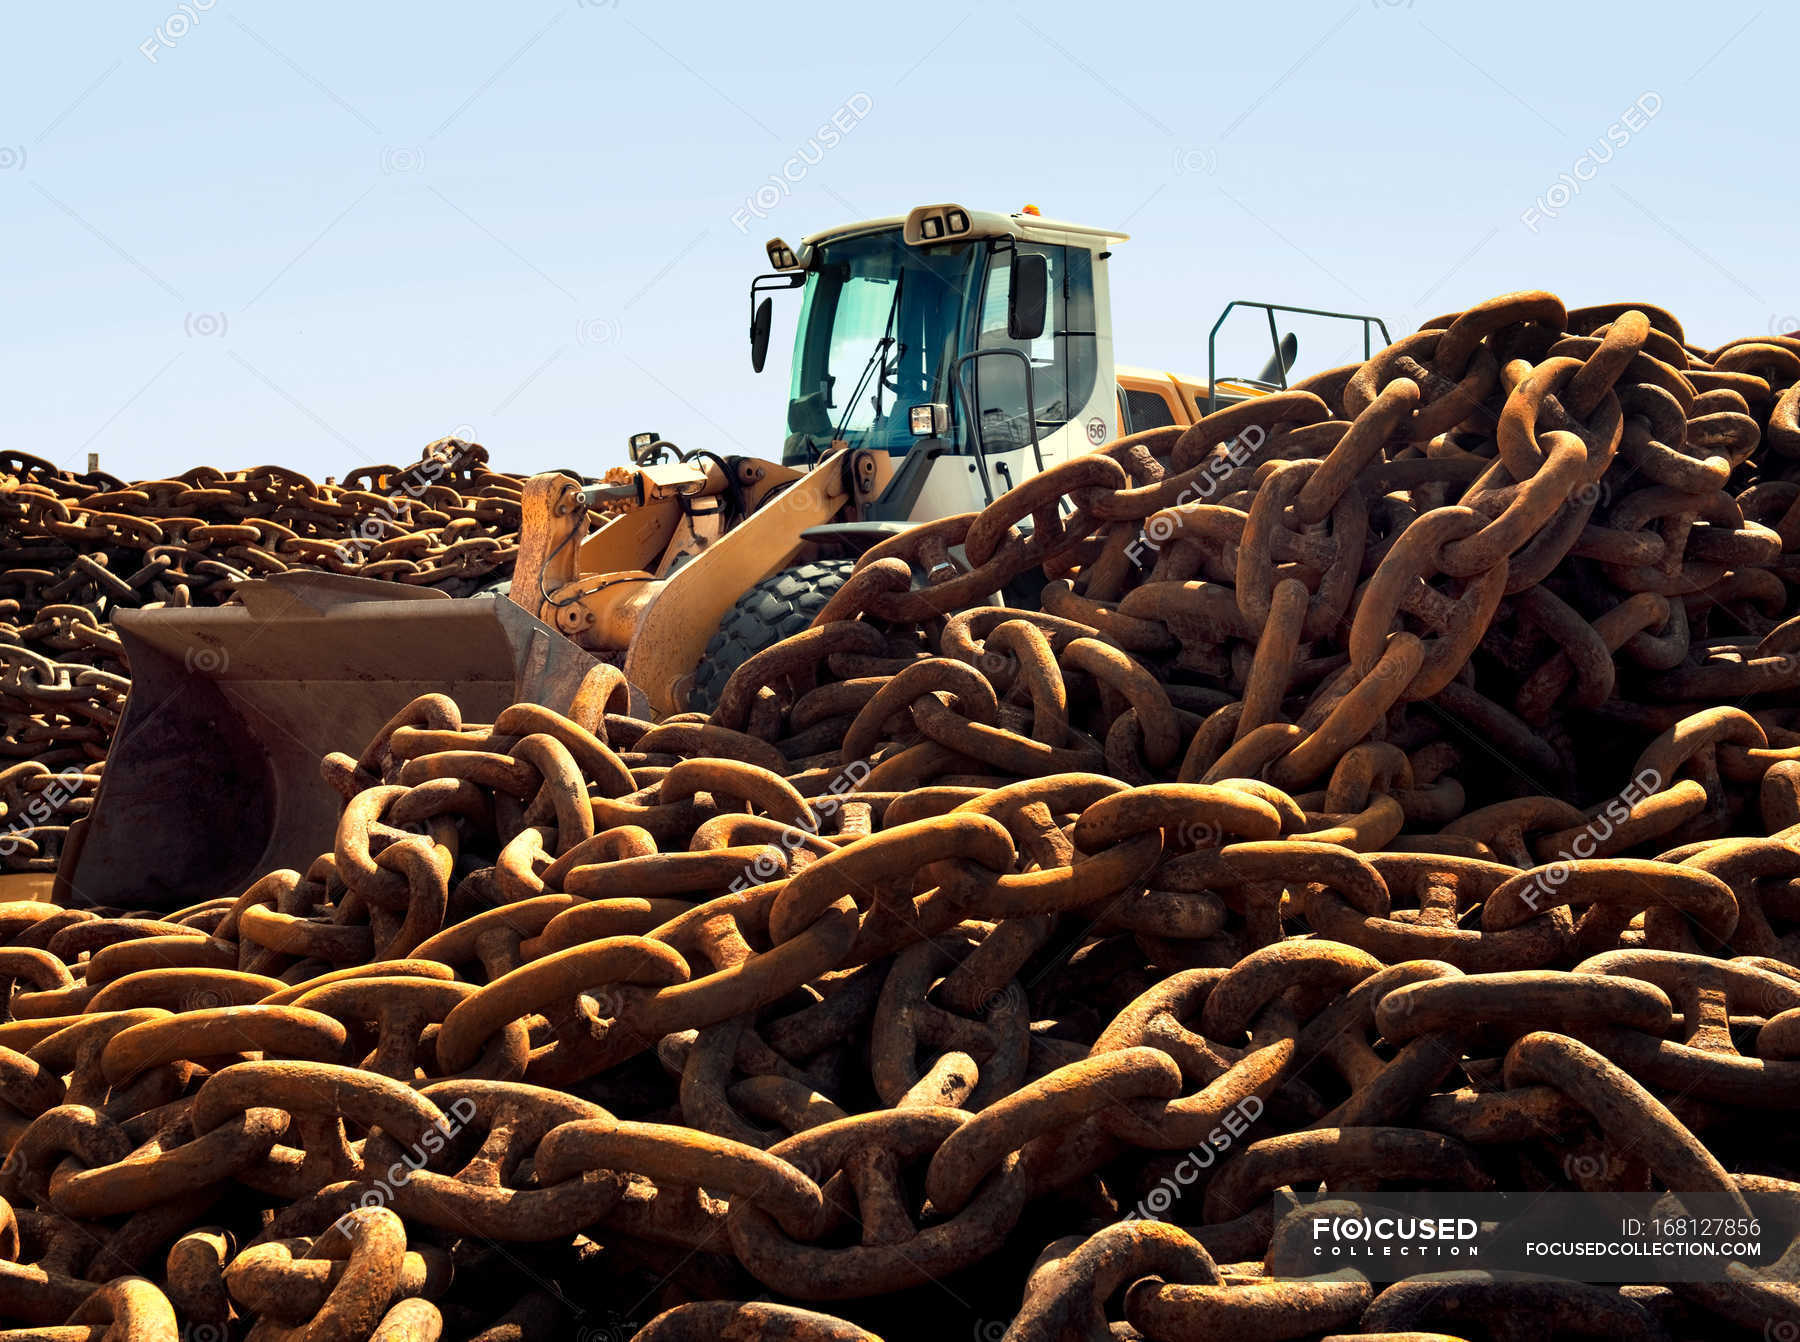 Rusted chains and excavator in scrap yard — Stock Photo | #168127856